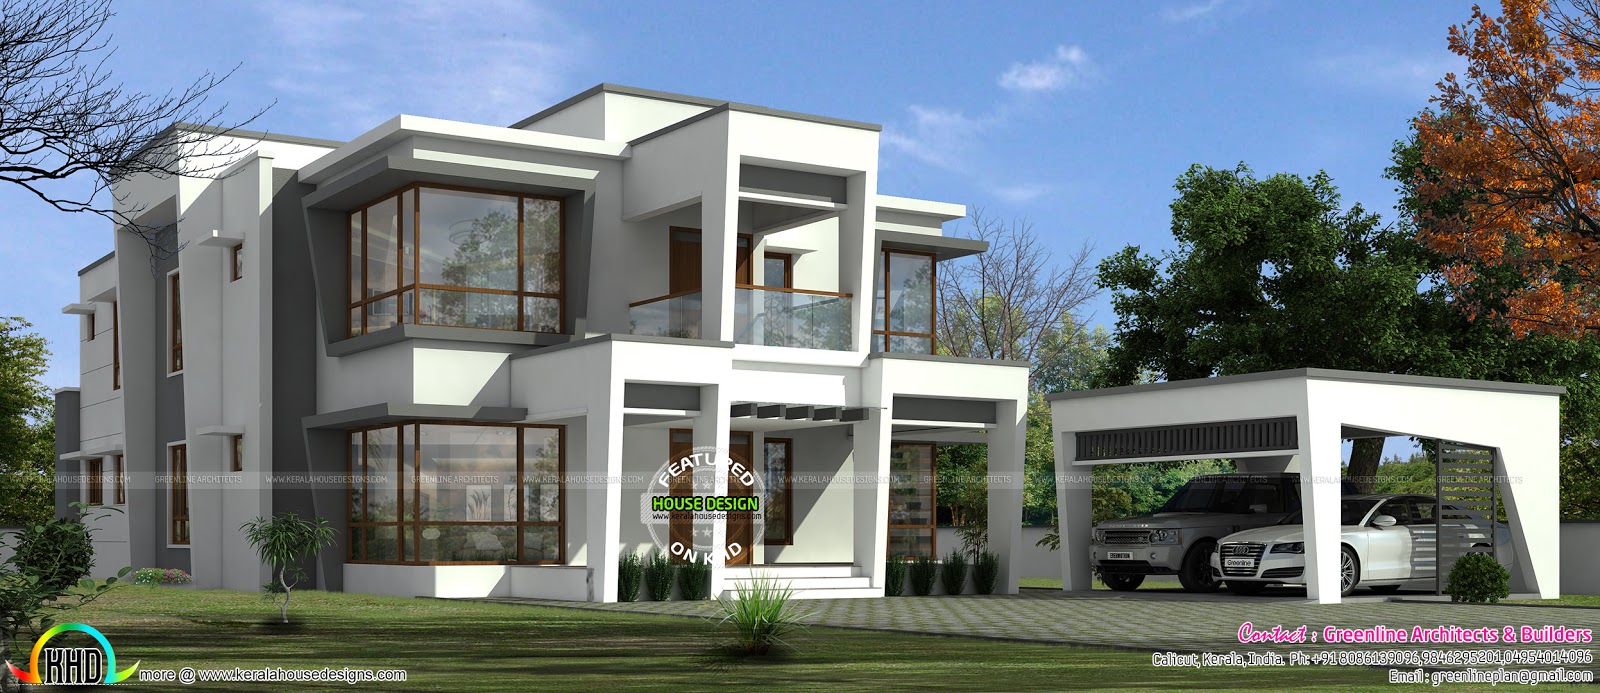  Most modern  house  in 2019 Kerala home  design  and floor plans 